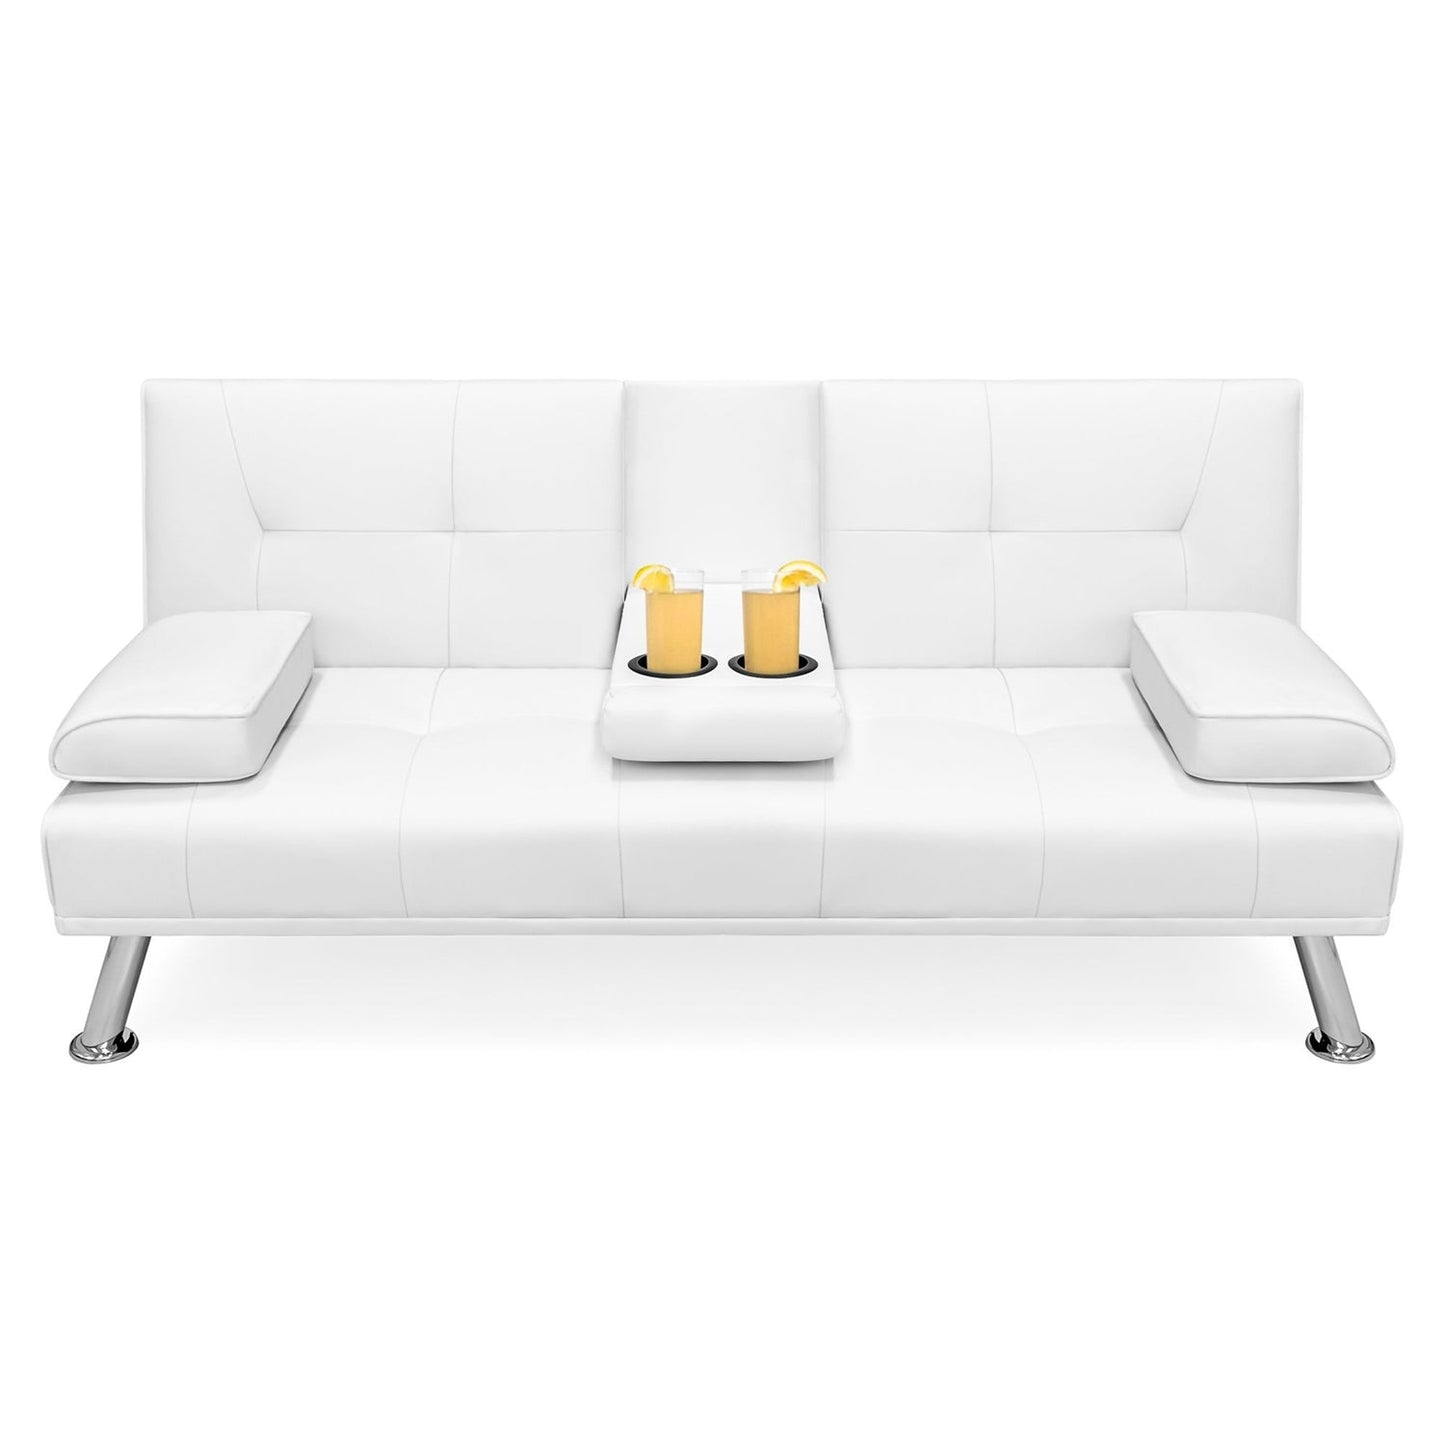 Living Room > Sofas - White Faux Leather Convertible Sofa Futon With 2 Cup Holders